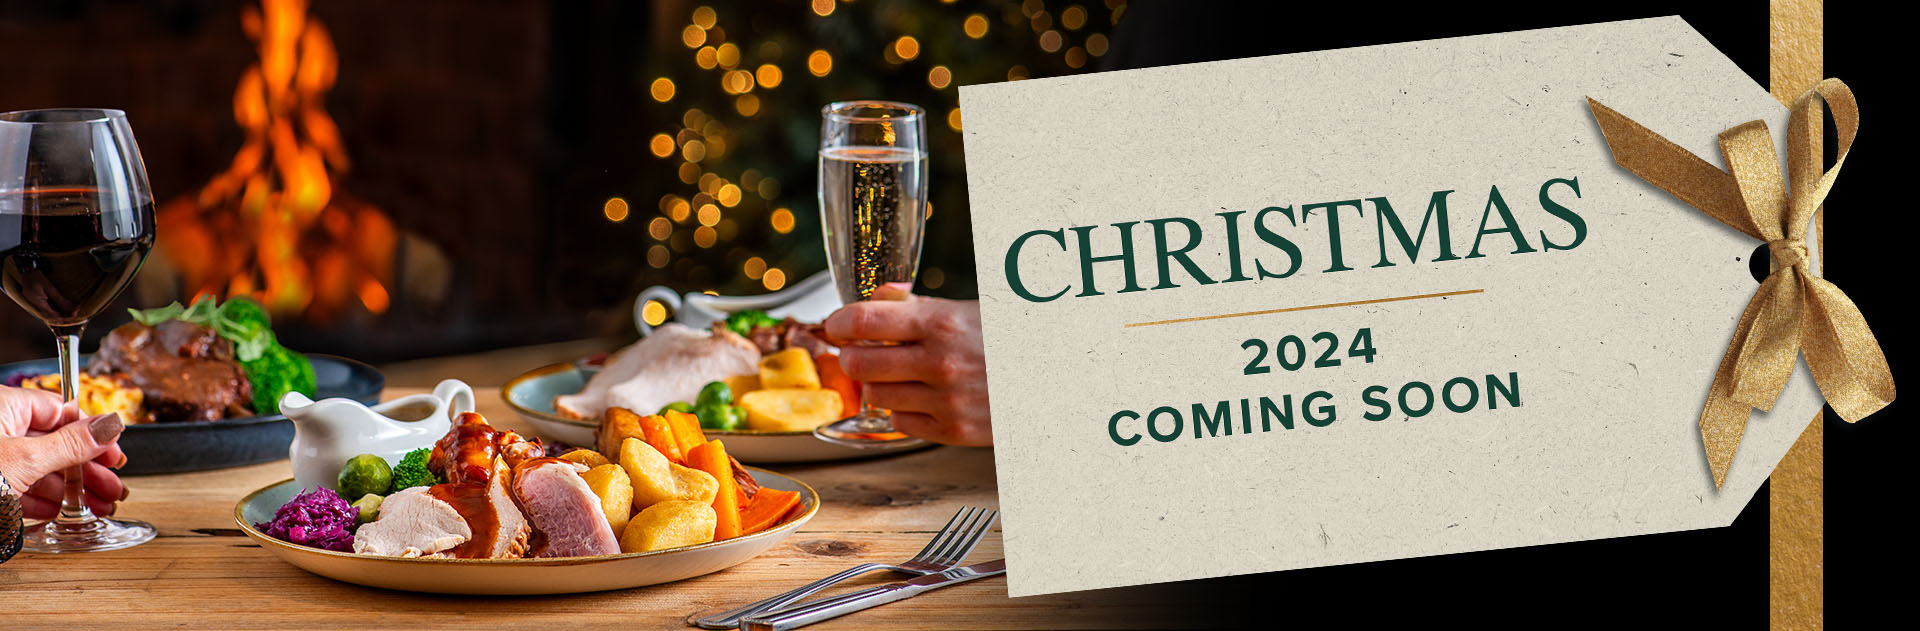 Christmas at The Three Stags 